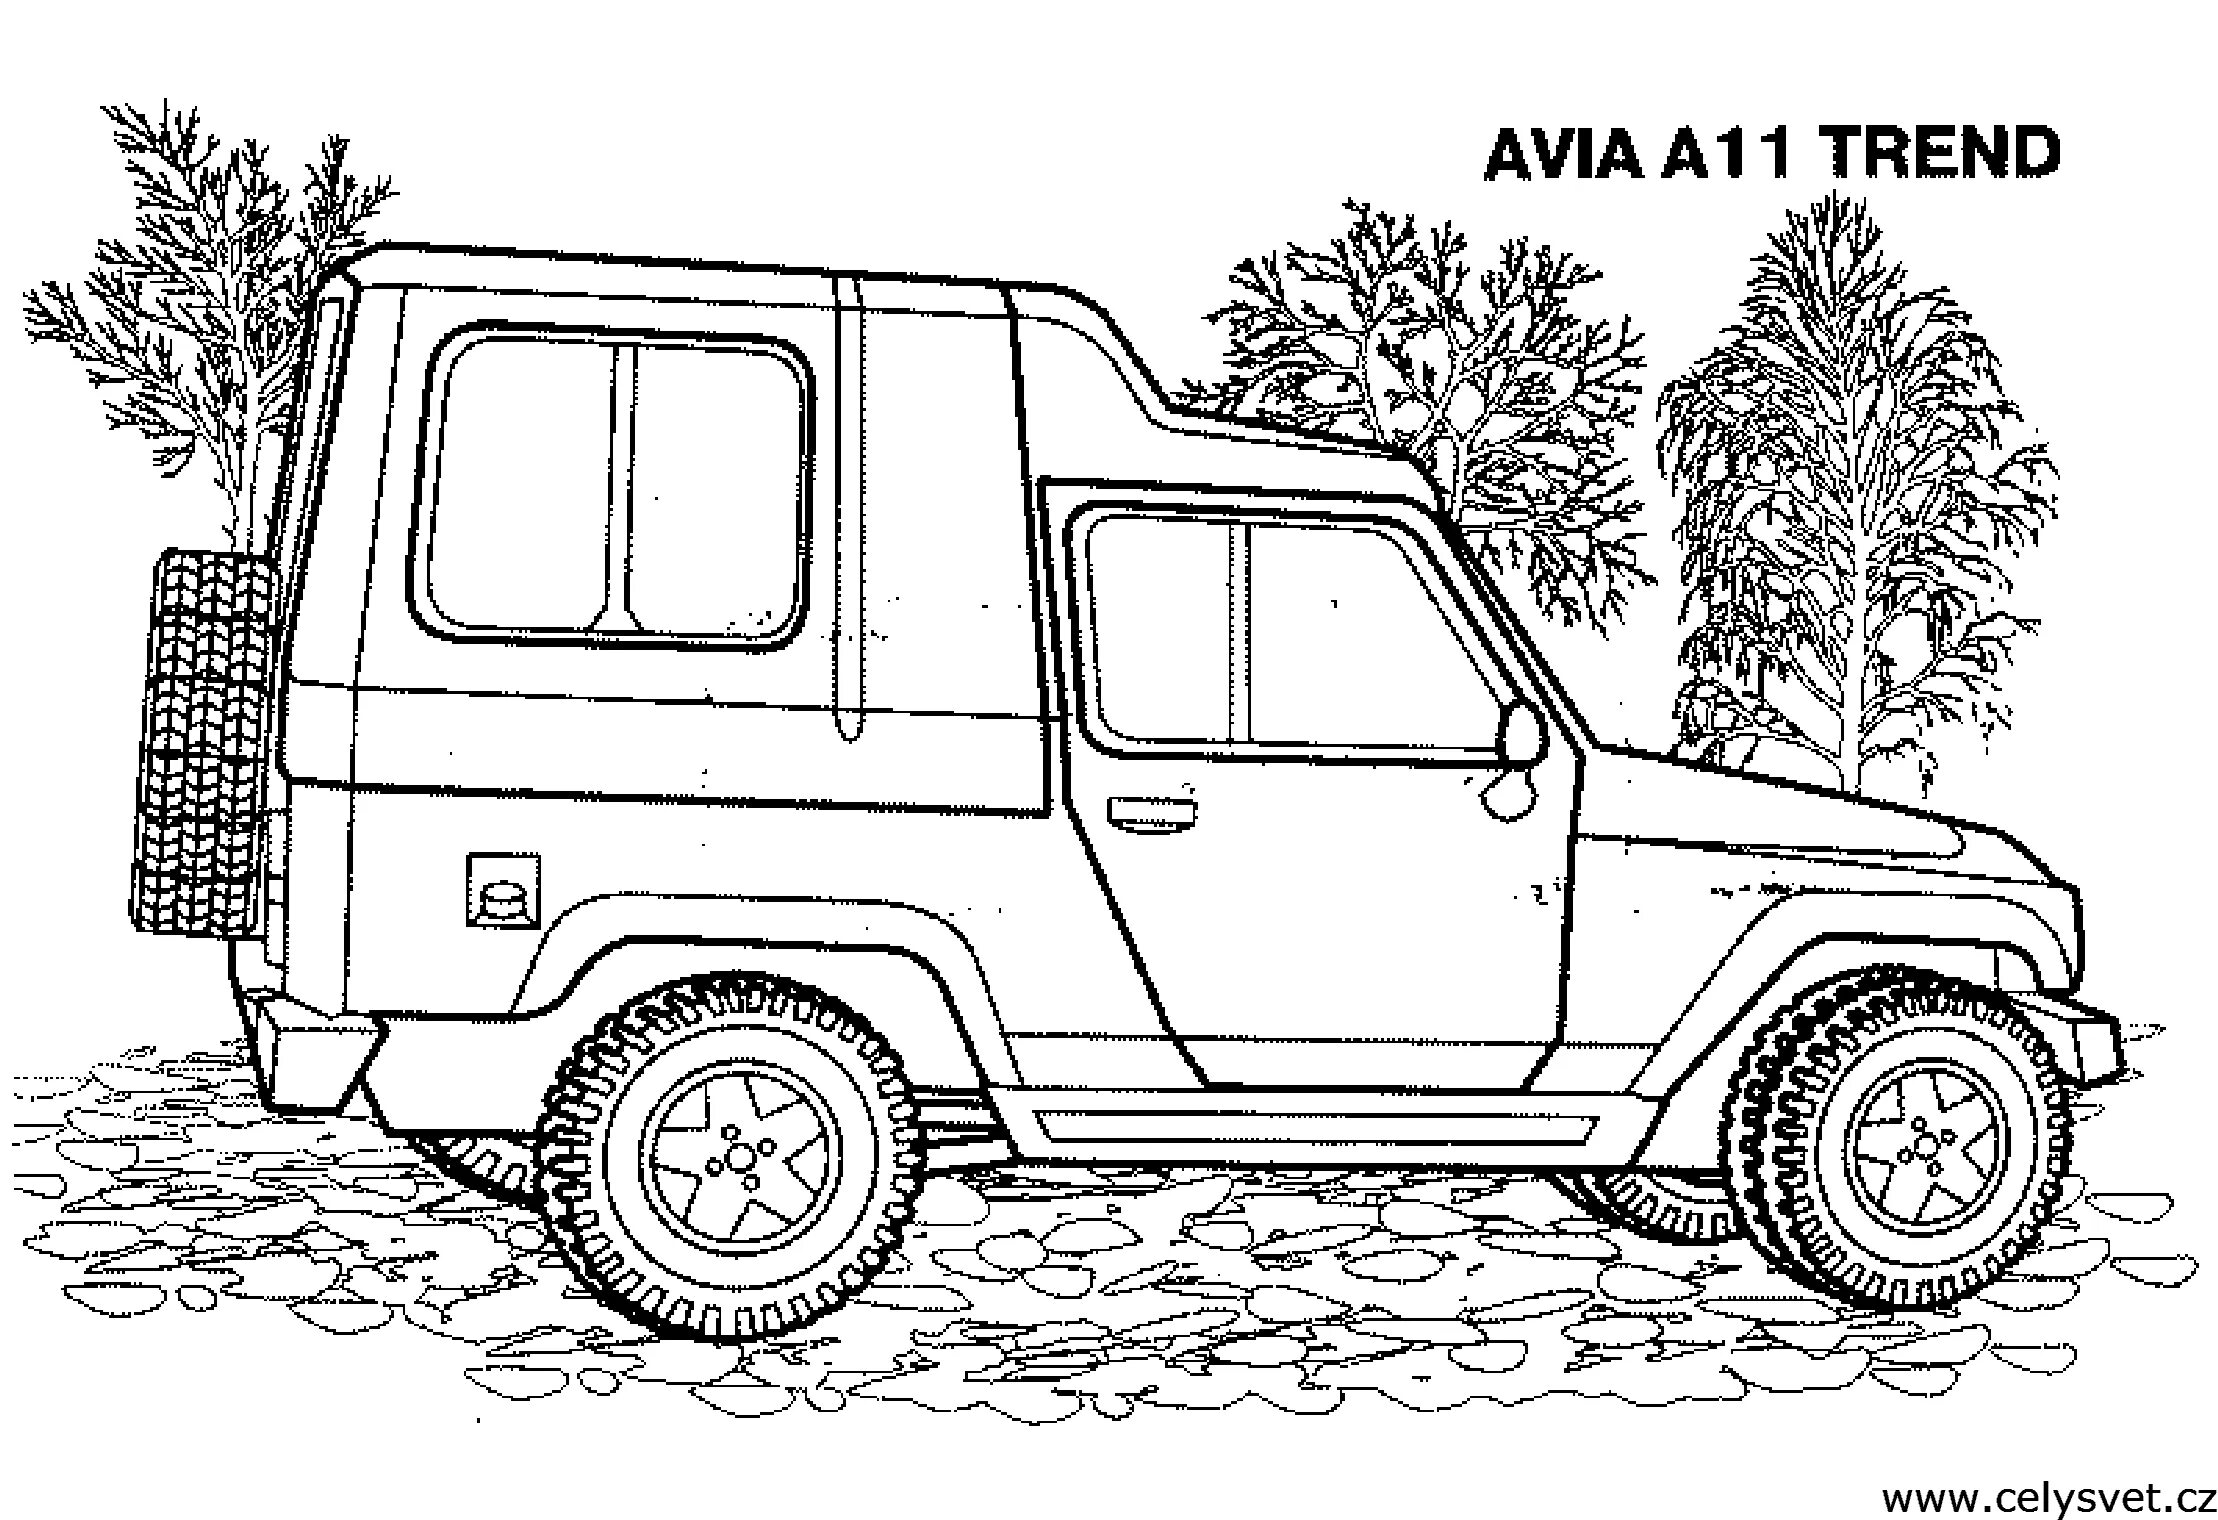 Funny UAZ coloring book for kids